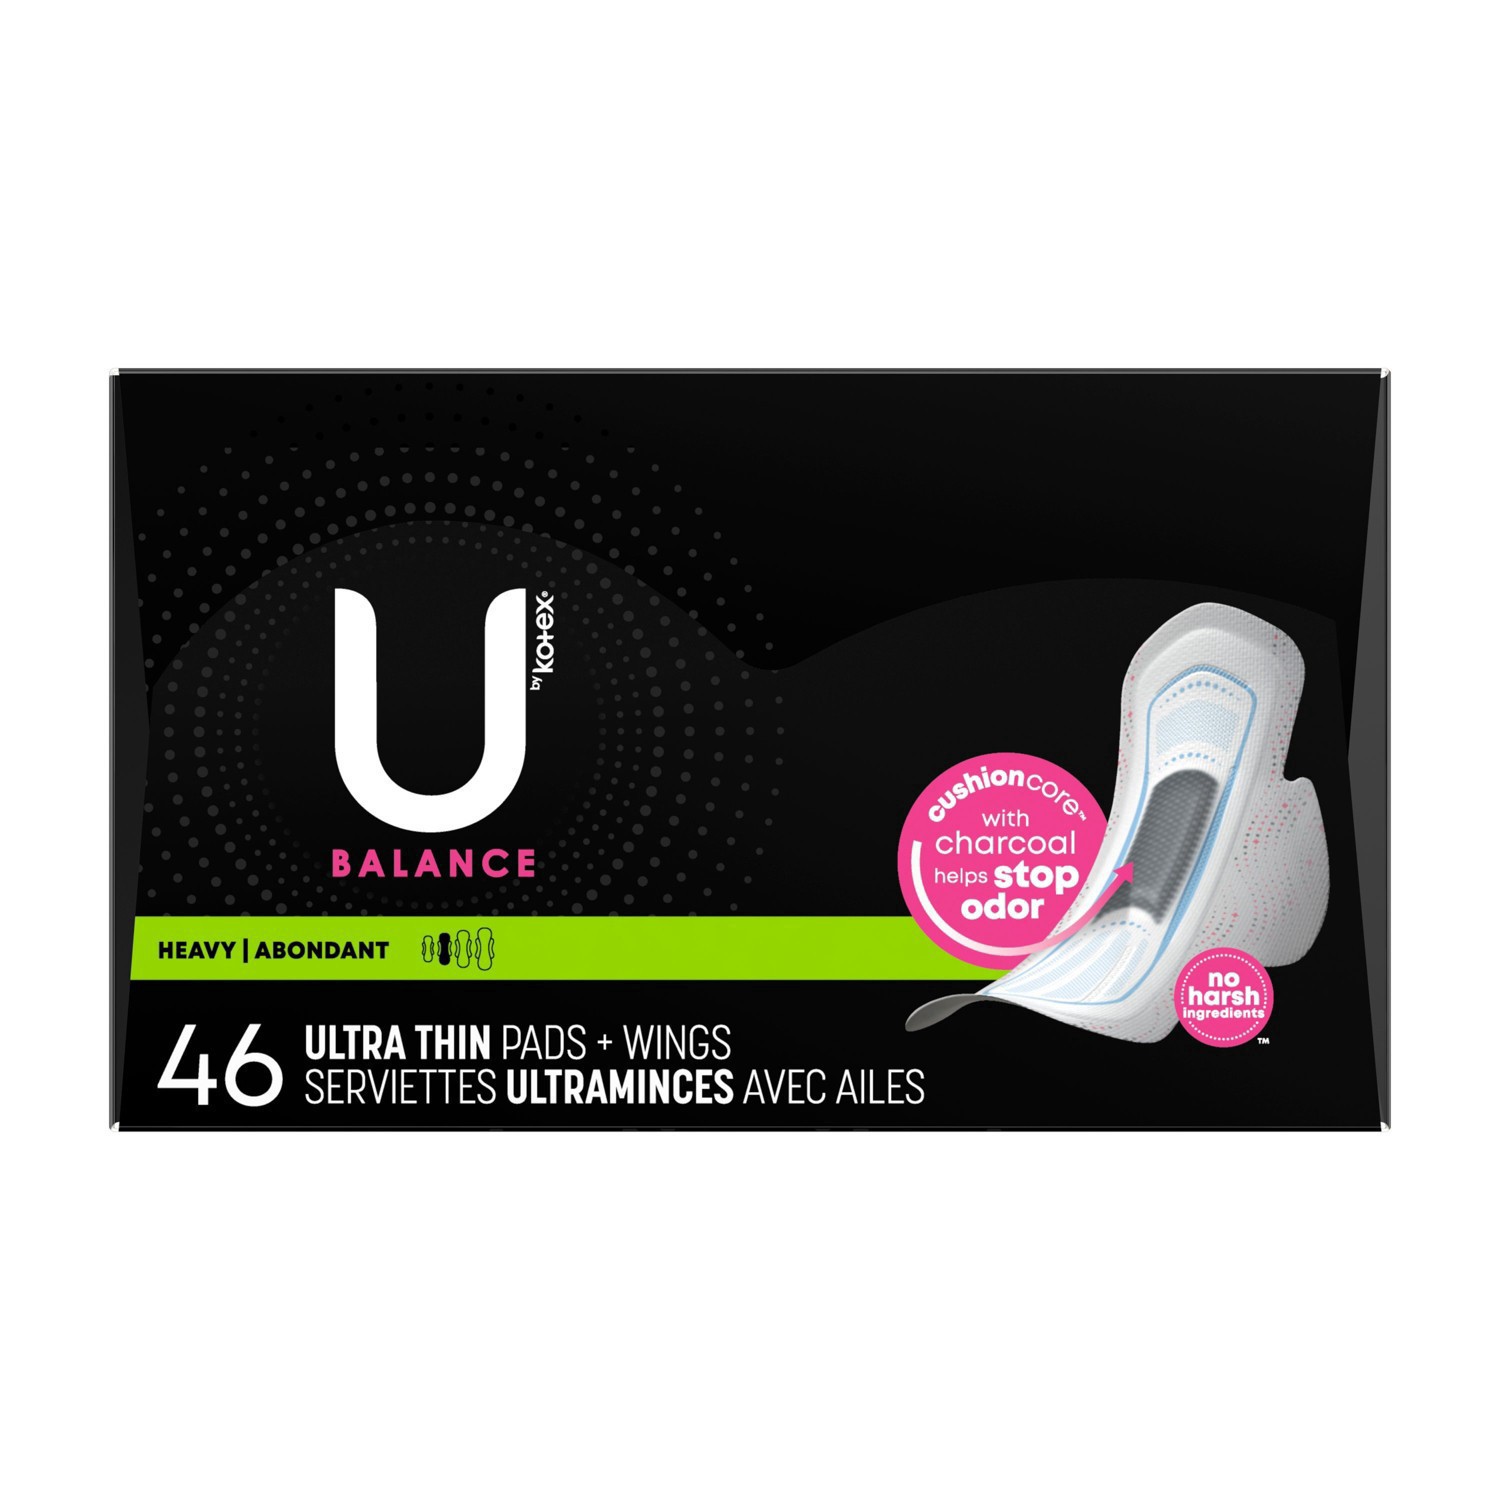 U by Kotex Balance Ultra Thin Pads with Wings - Heavy Absorbency